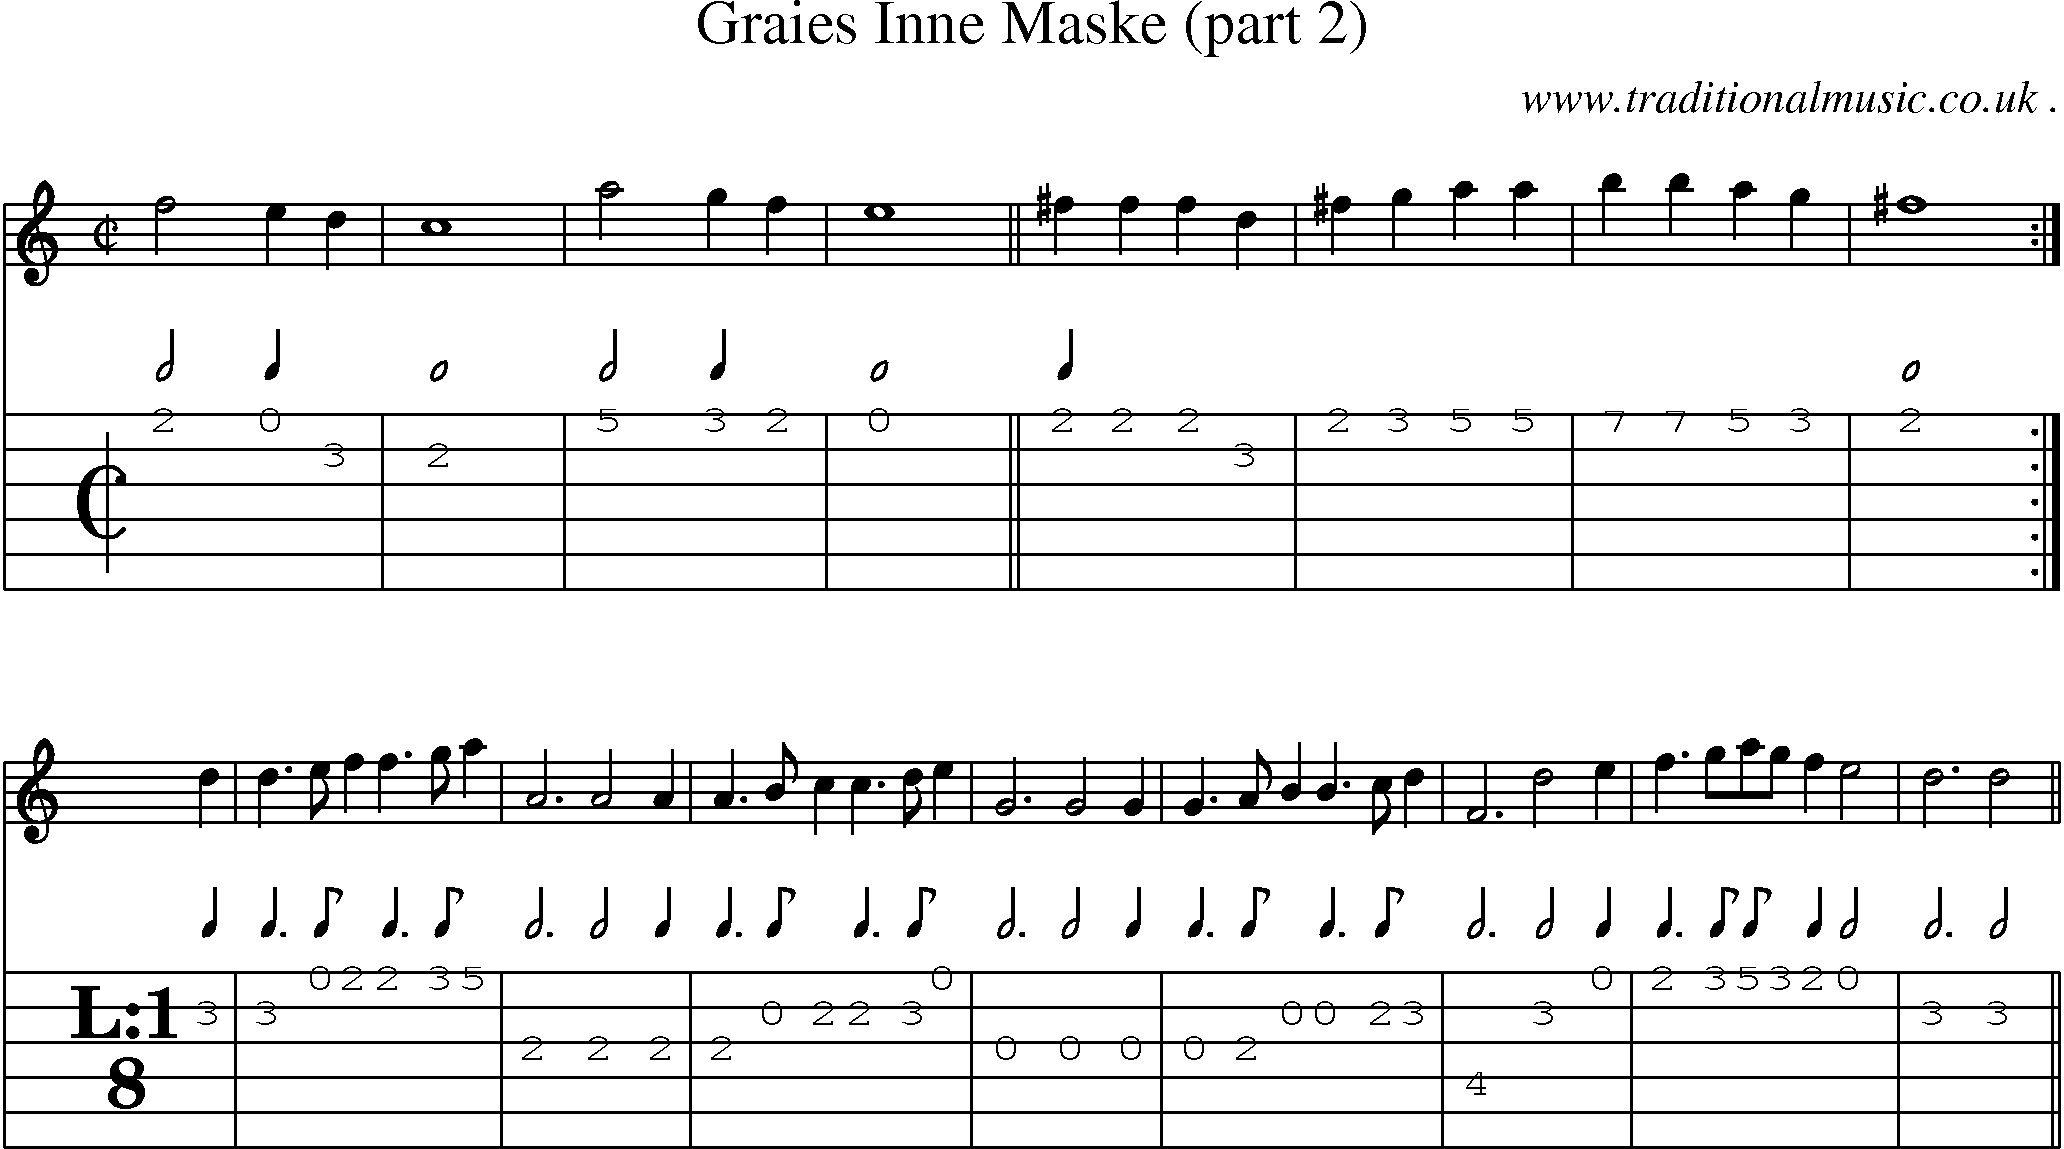 Sheet-Music and Guitar Tabs for Graies Inne Maske (part 2)